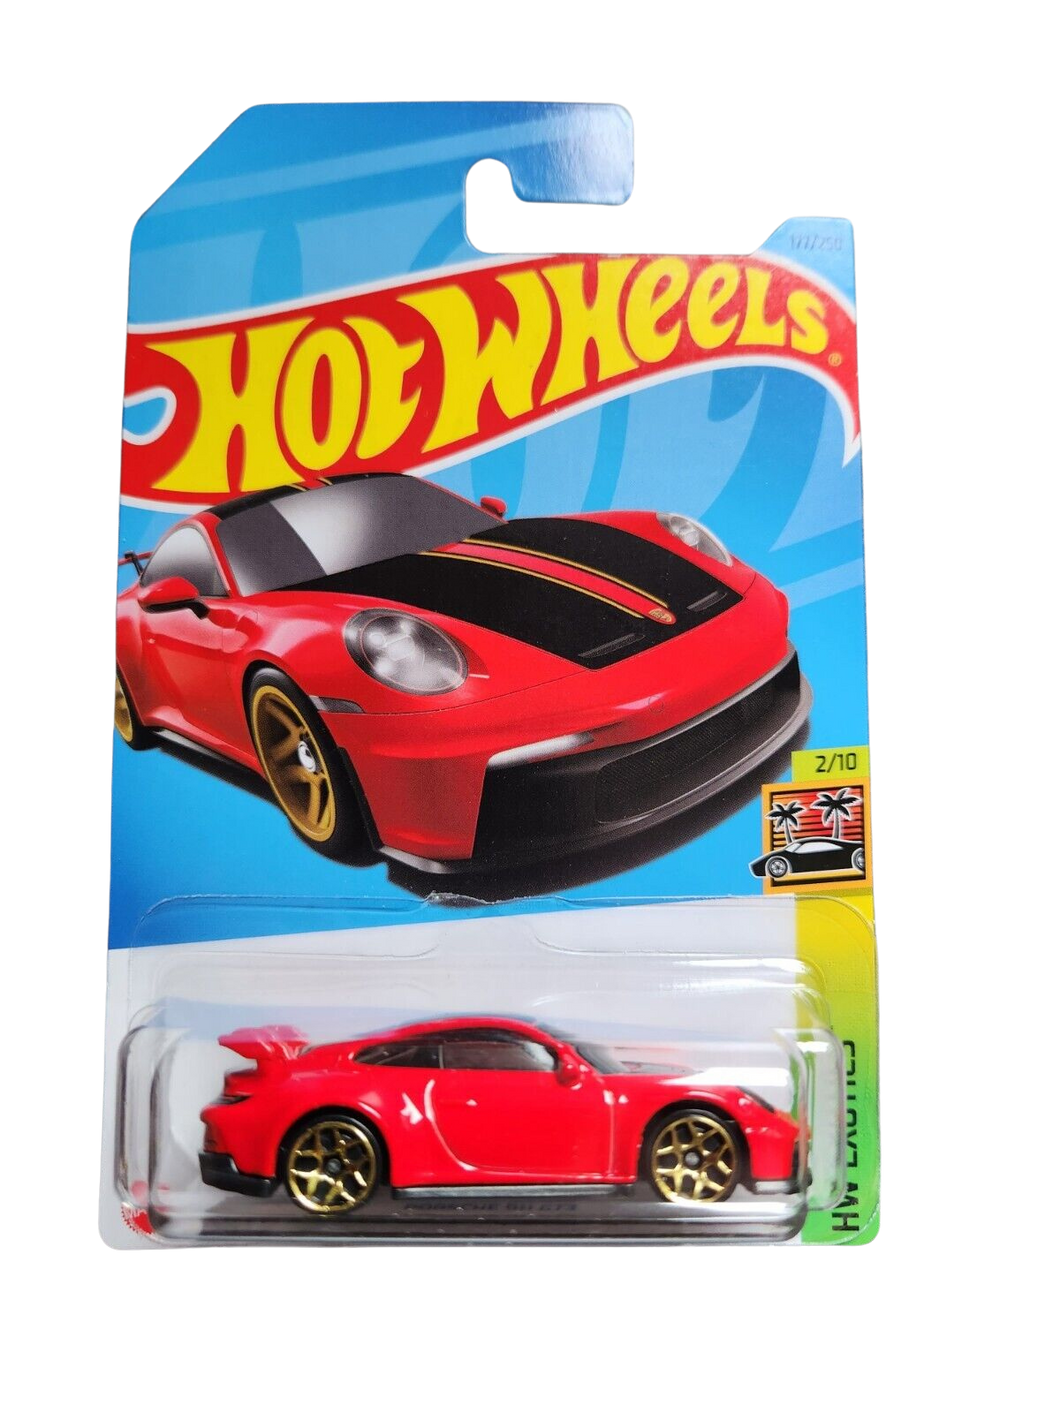 2023 Hot Wheels Porsche 911 GT3 - 1:64 1/64 HW Exotics 2/10 Red Maple and Mangoes